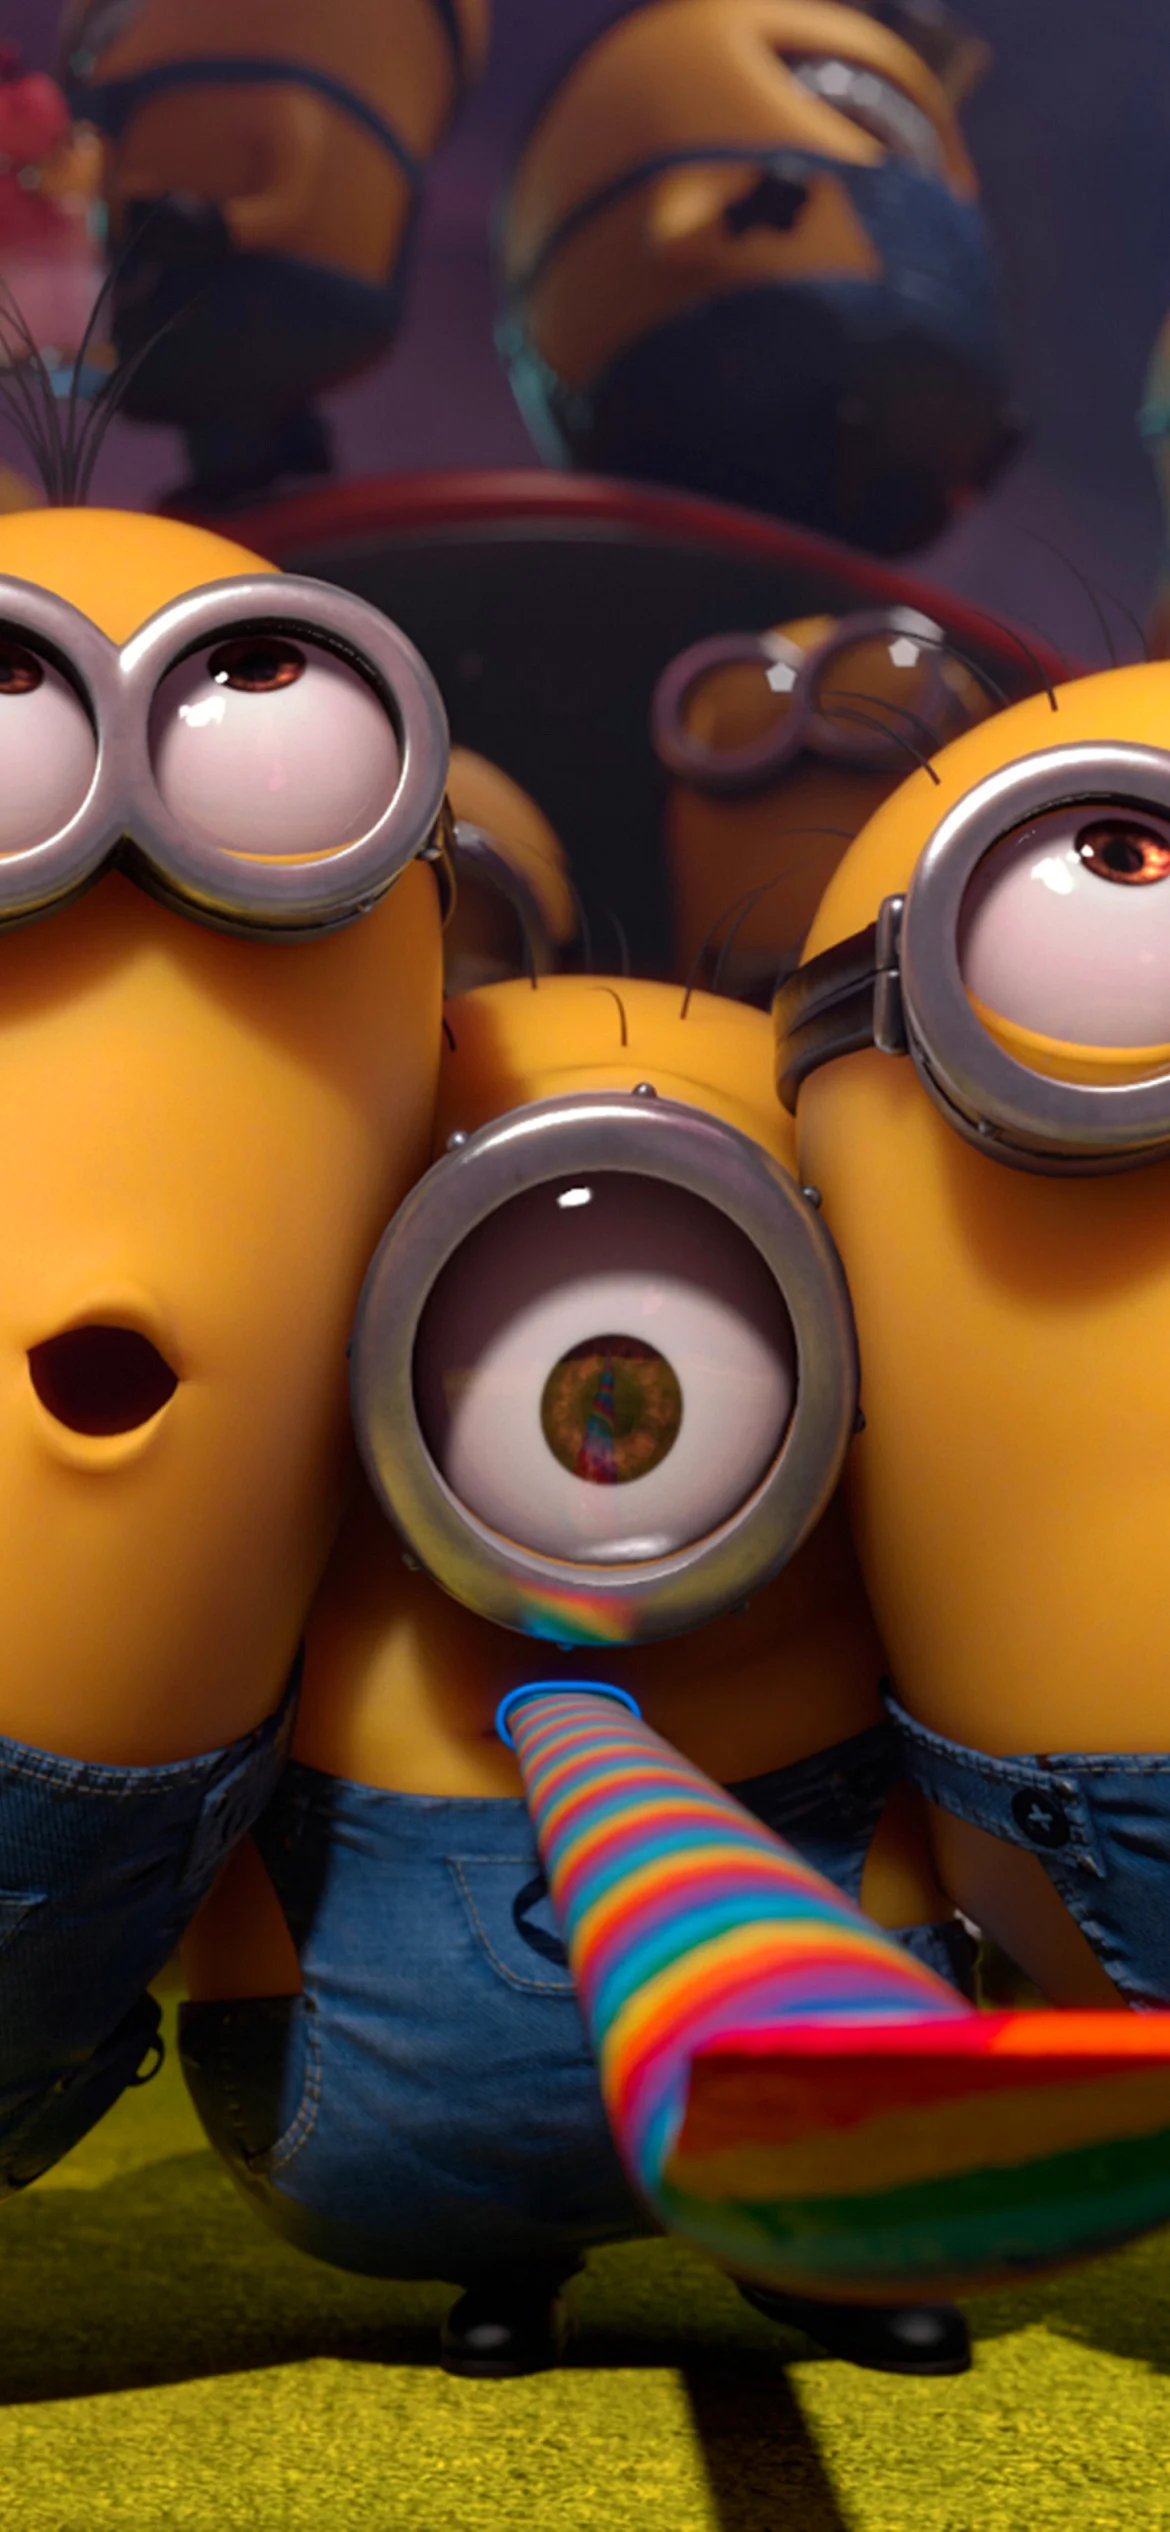 Despicable Me 2 2013 Wallpaper for iPhone 13